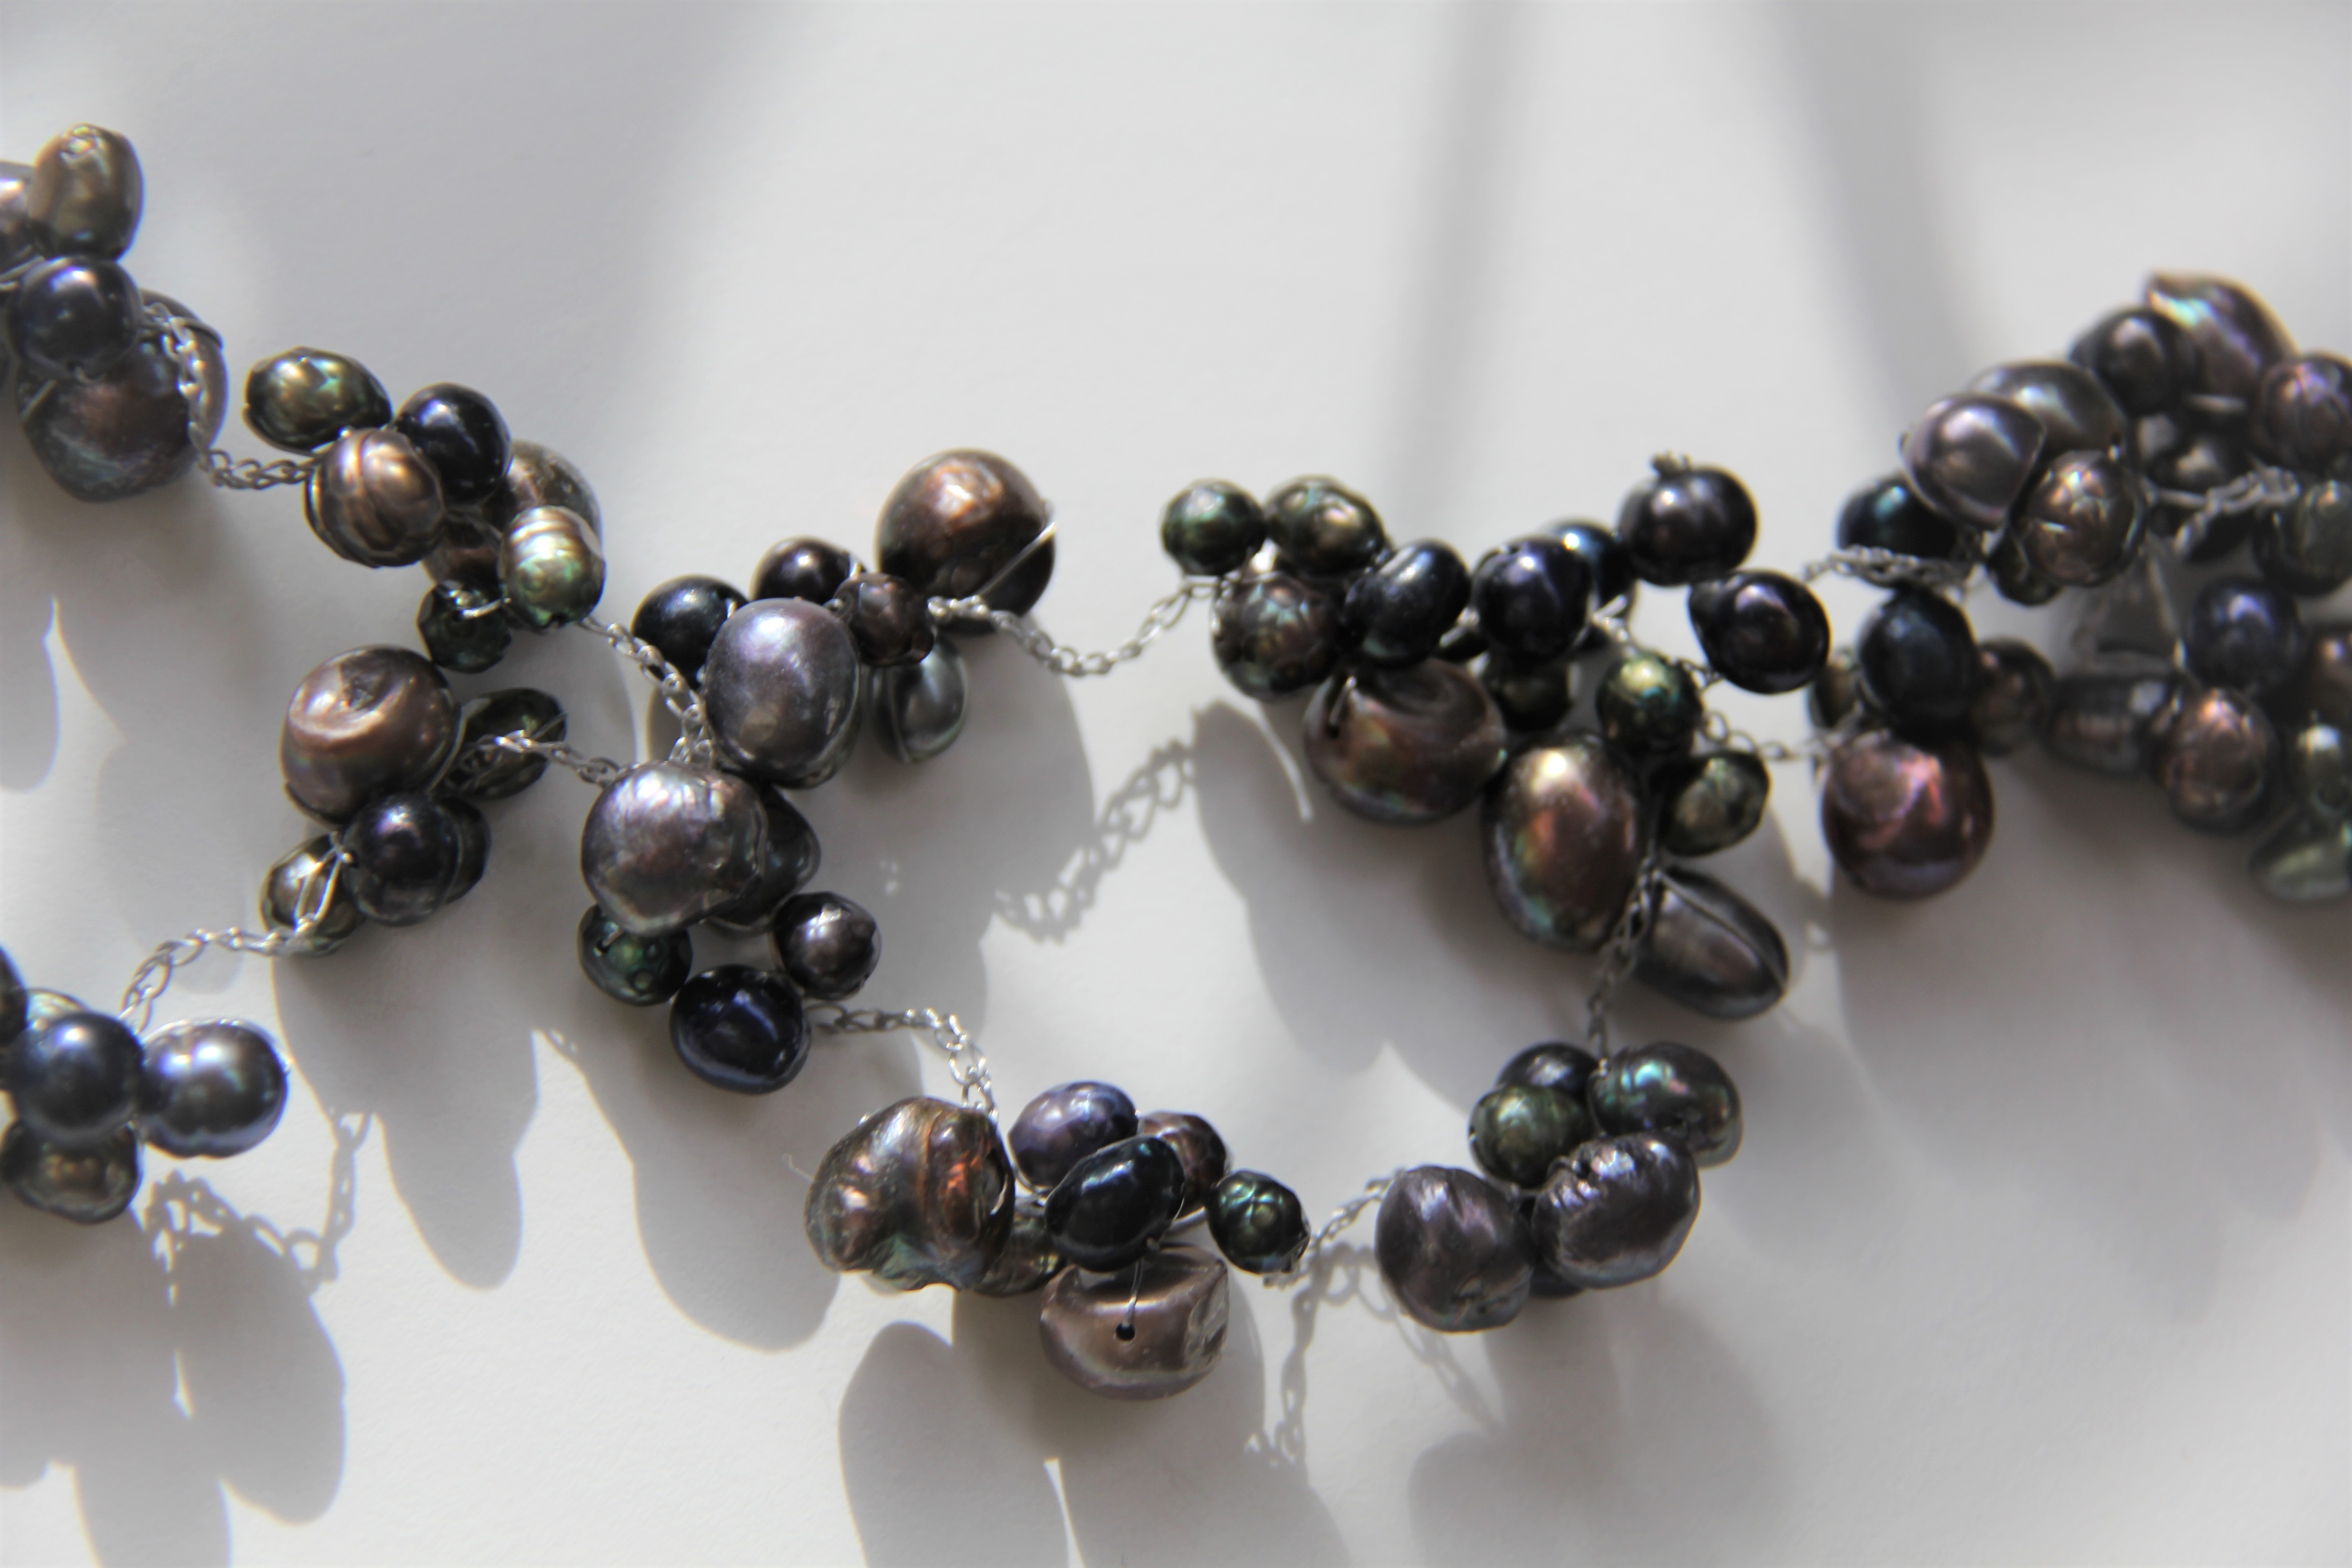 Mervi Haapakoski: Fresh Water Pearl Necklace in Multi Colour Black Product Image 4 of 4